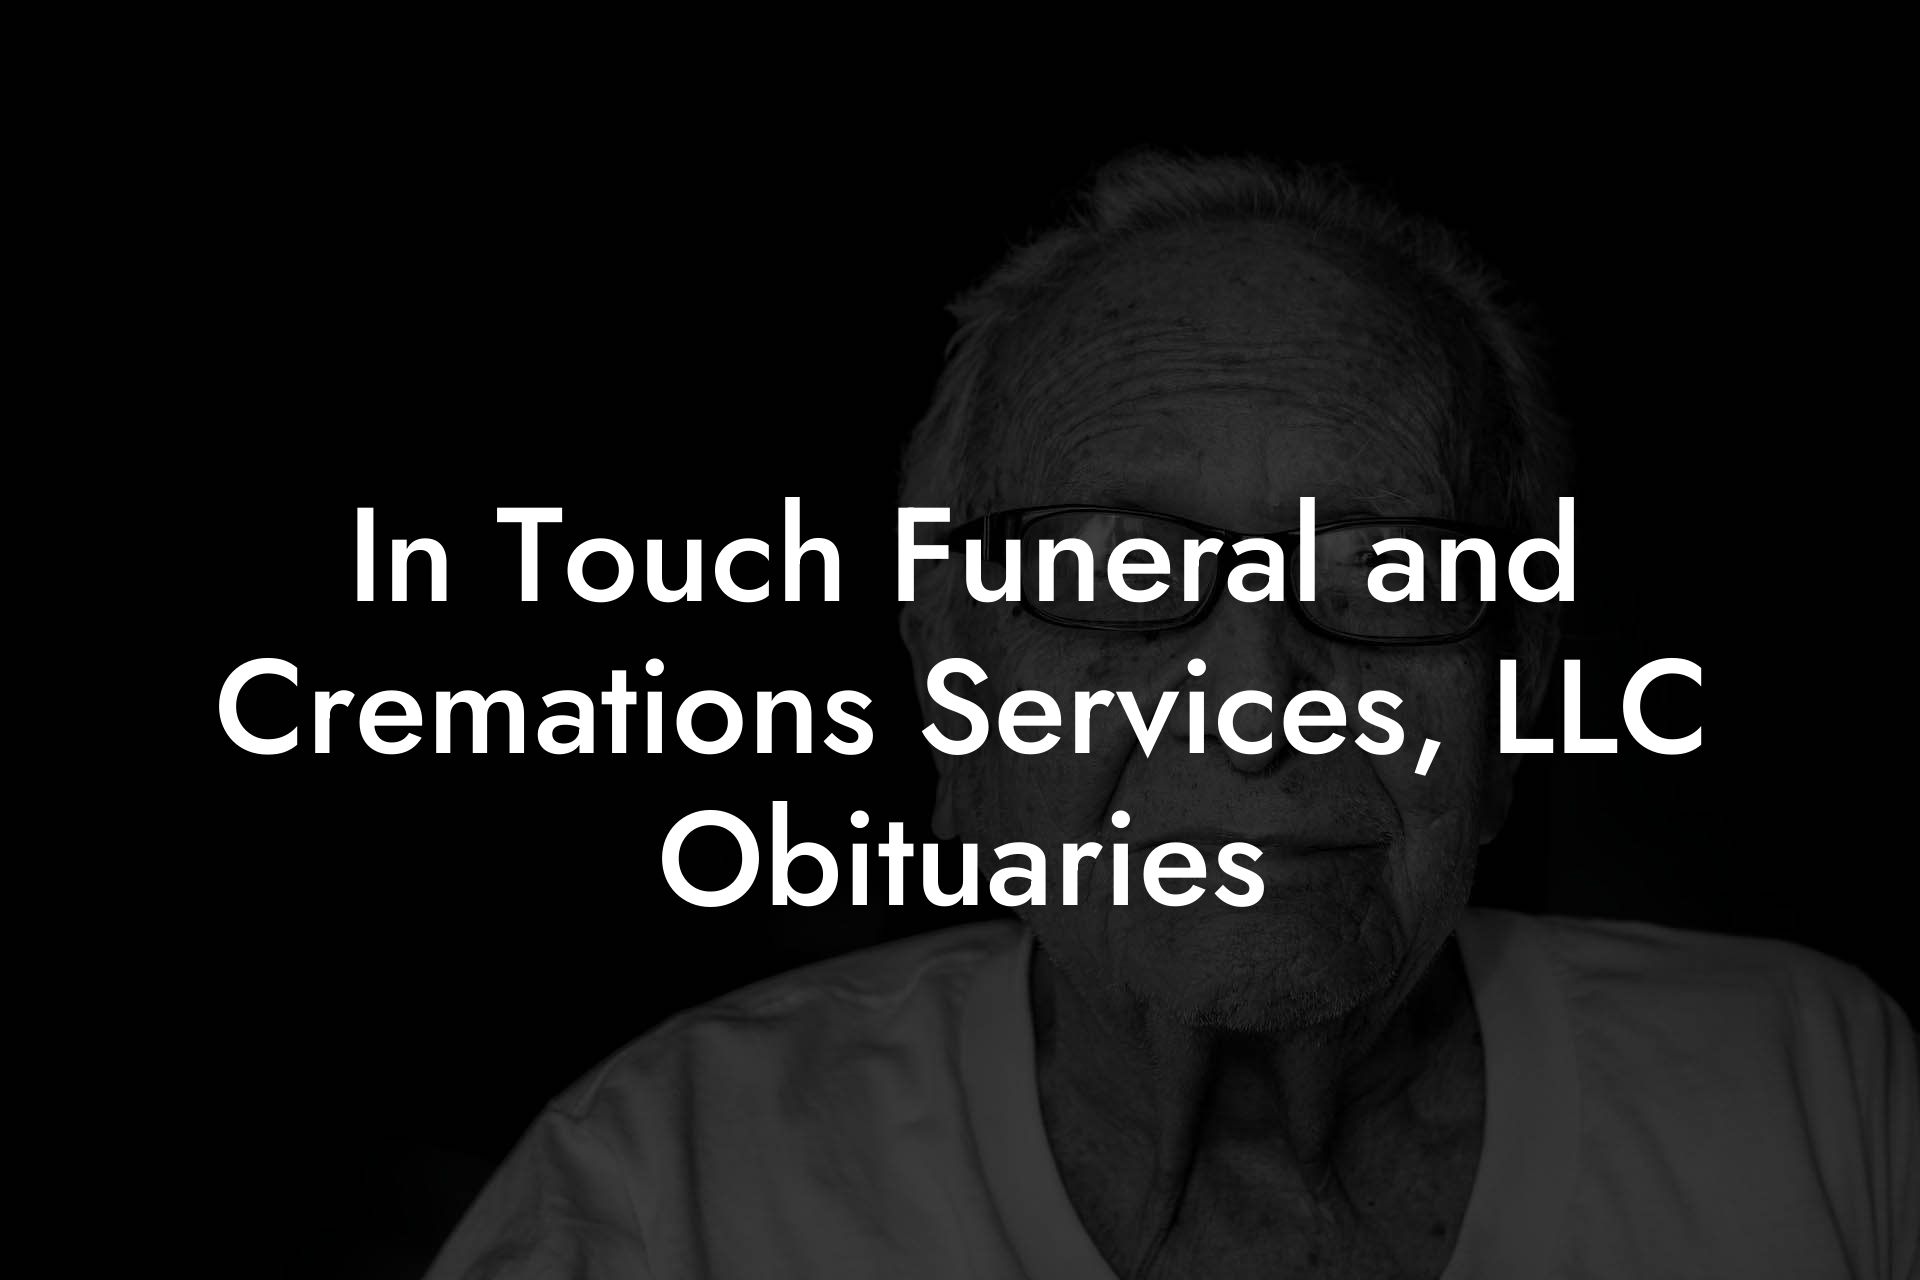 In Touch Funeral and Cremations Services, LLC Obituaries